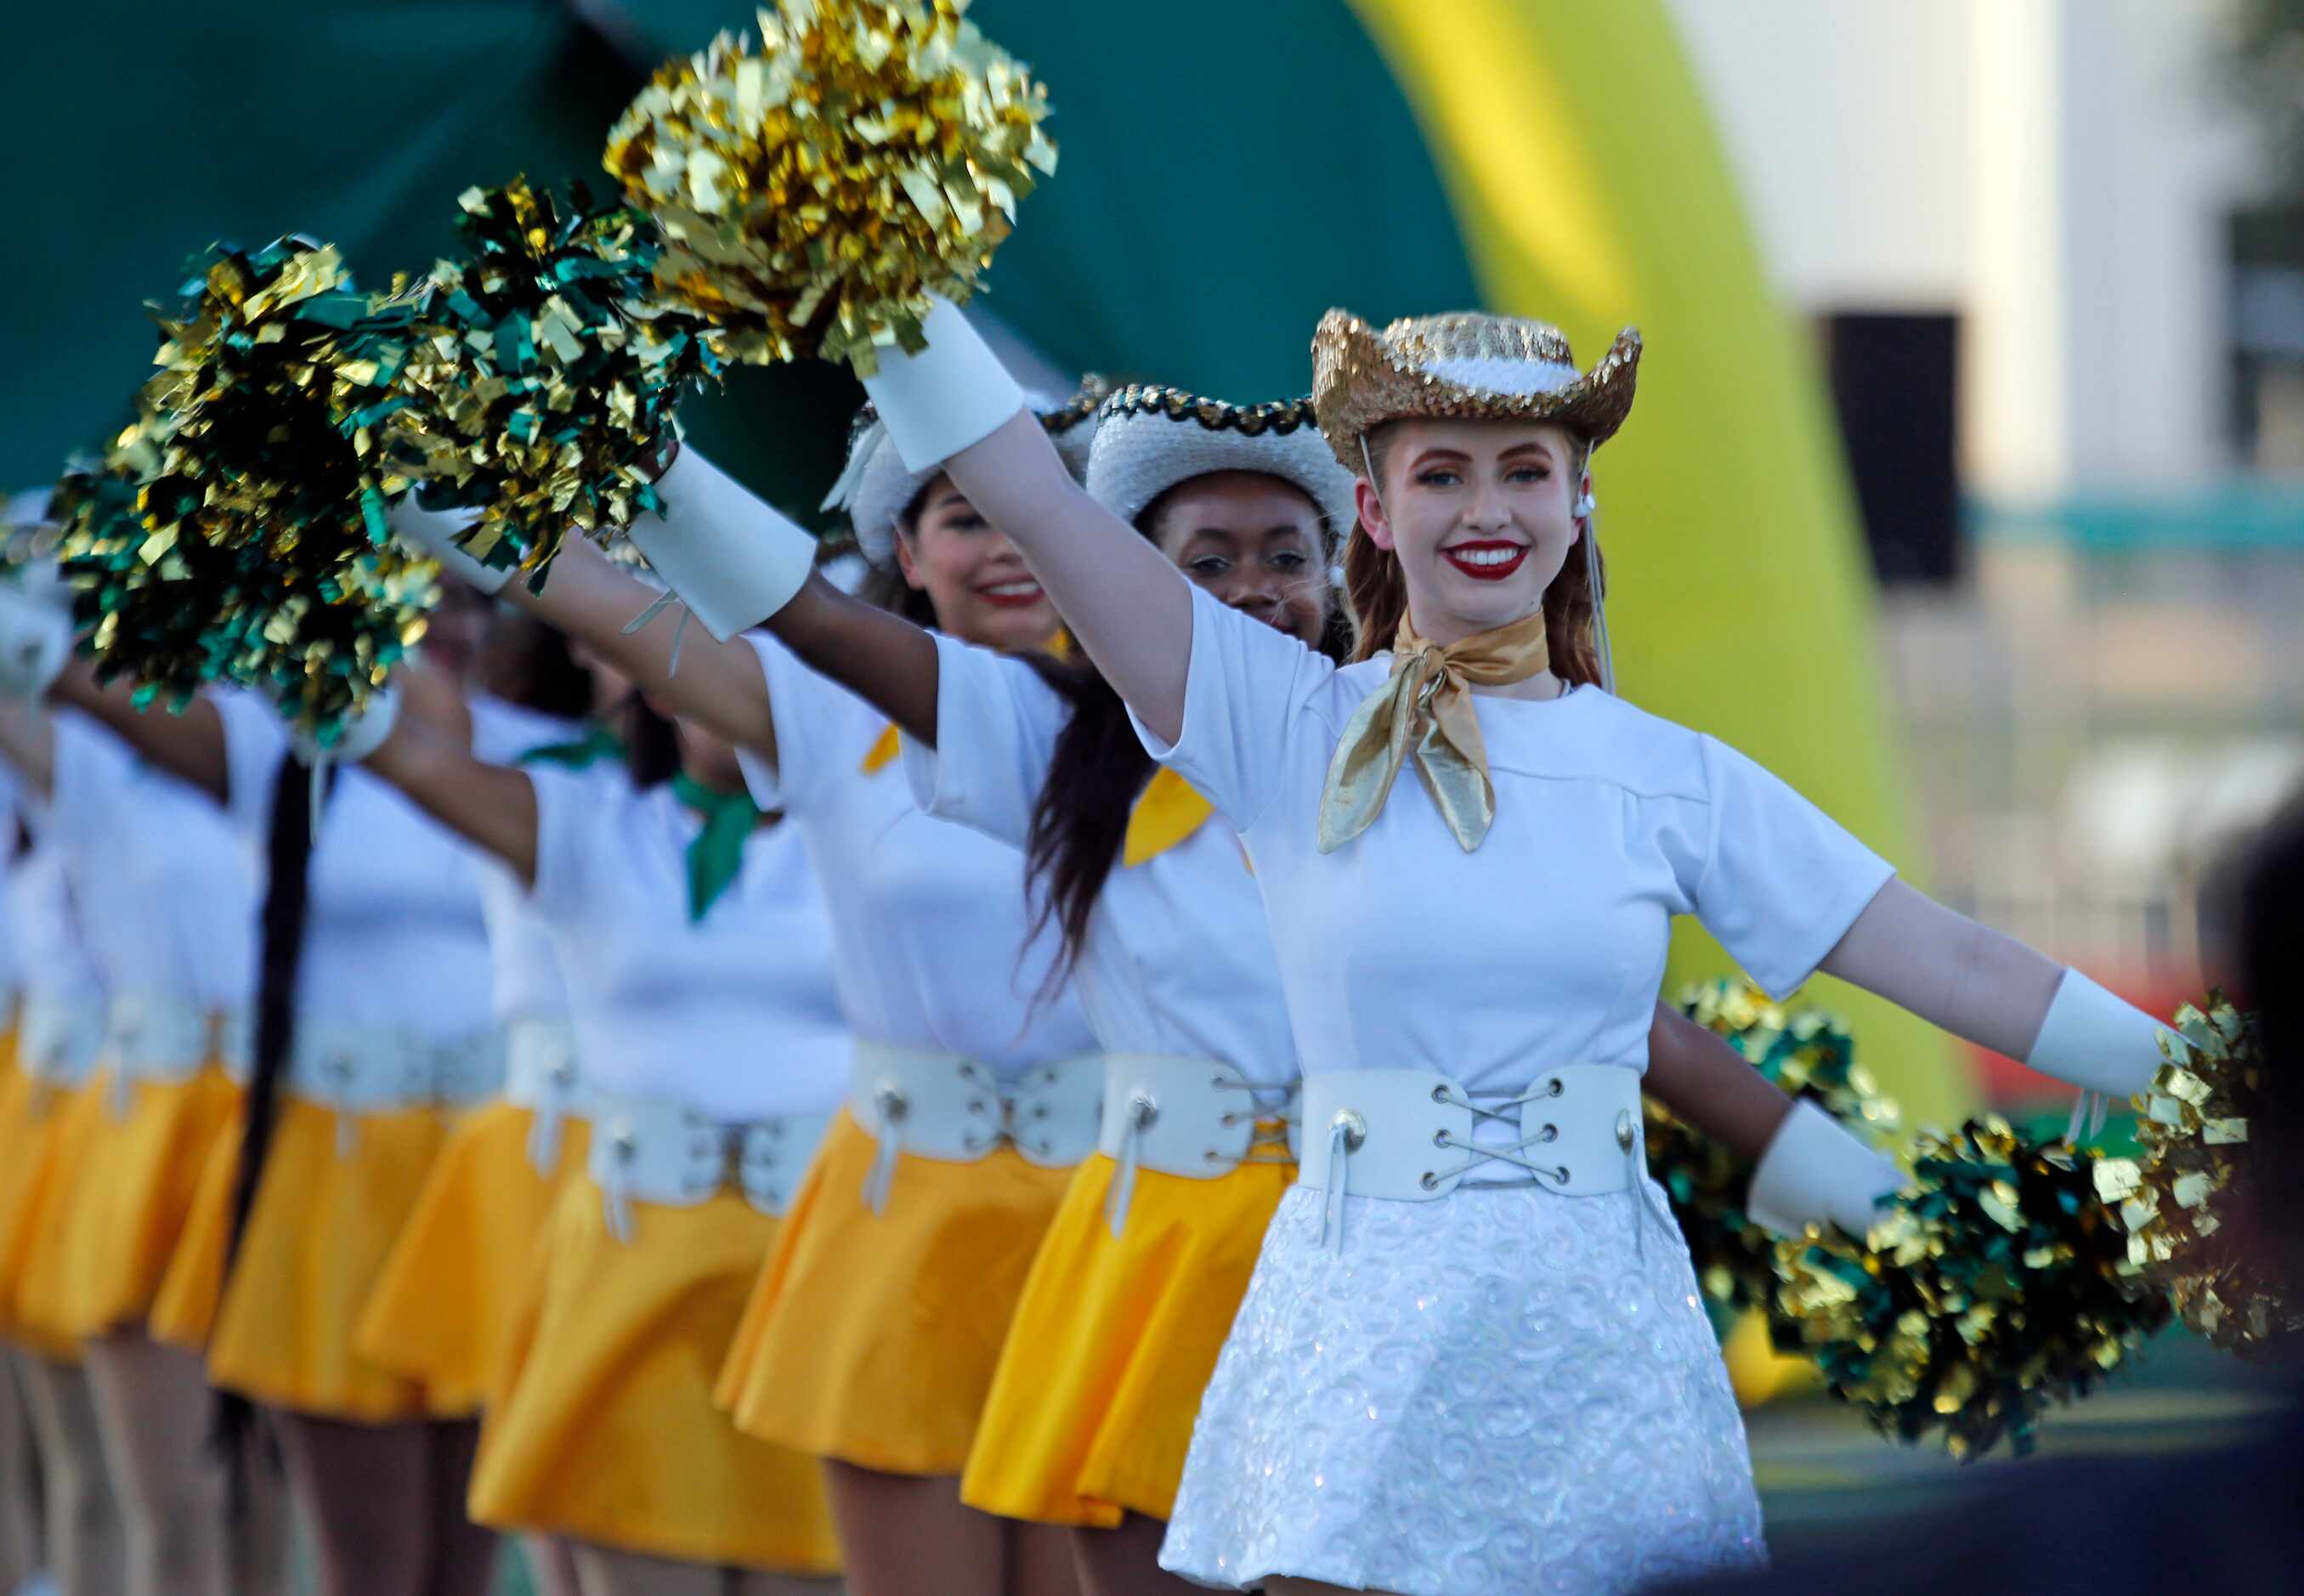 The Newman Smith high drill team performs a routine before the first half of a high school...